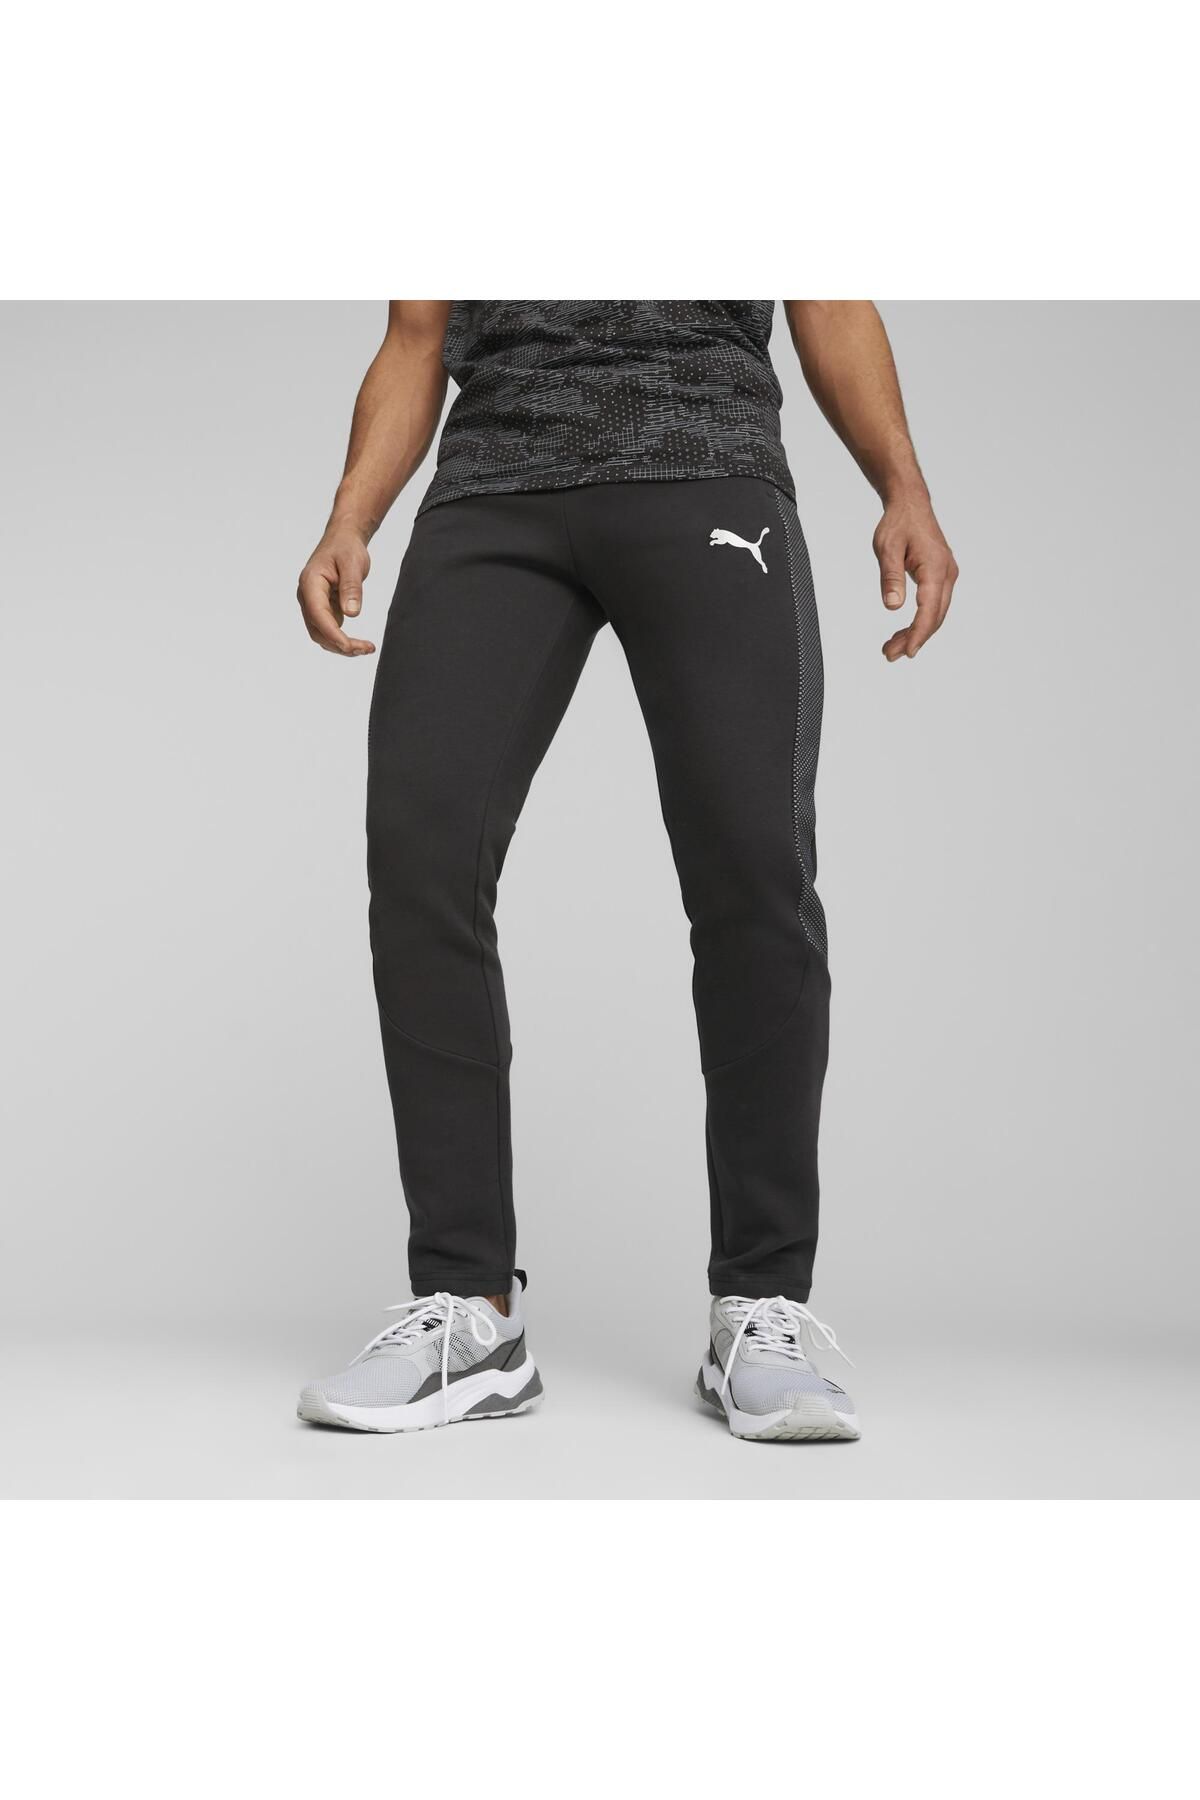 Green Puma Sports Trouser in Kottayam at best price by B S Sports - Justdial